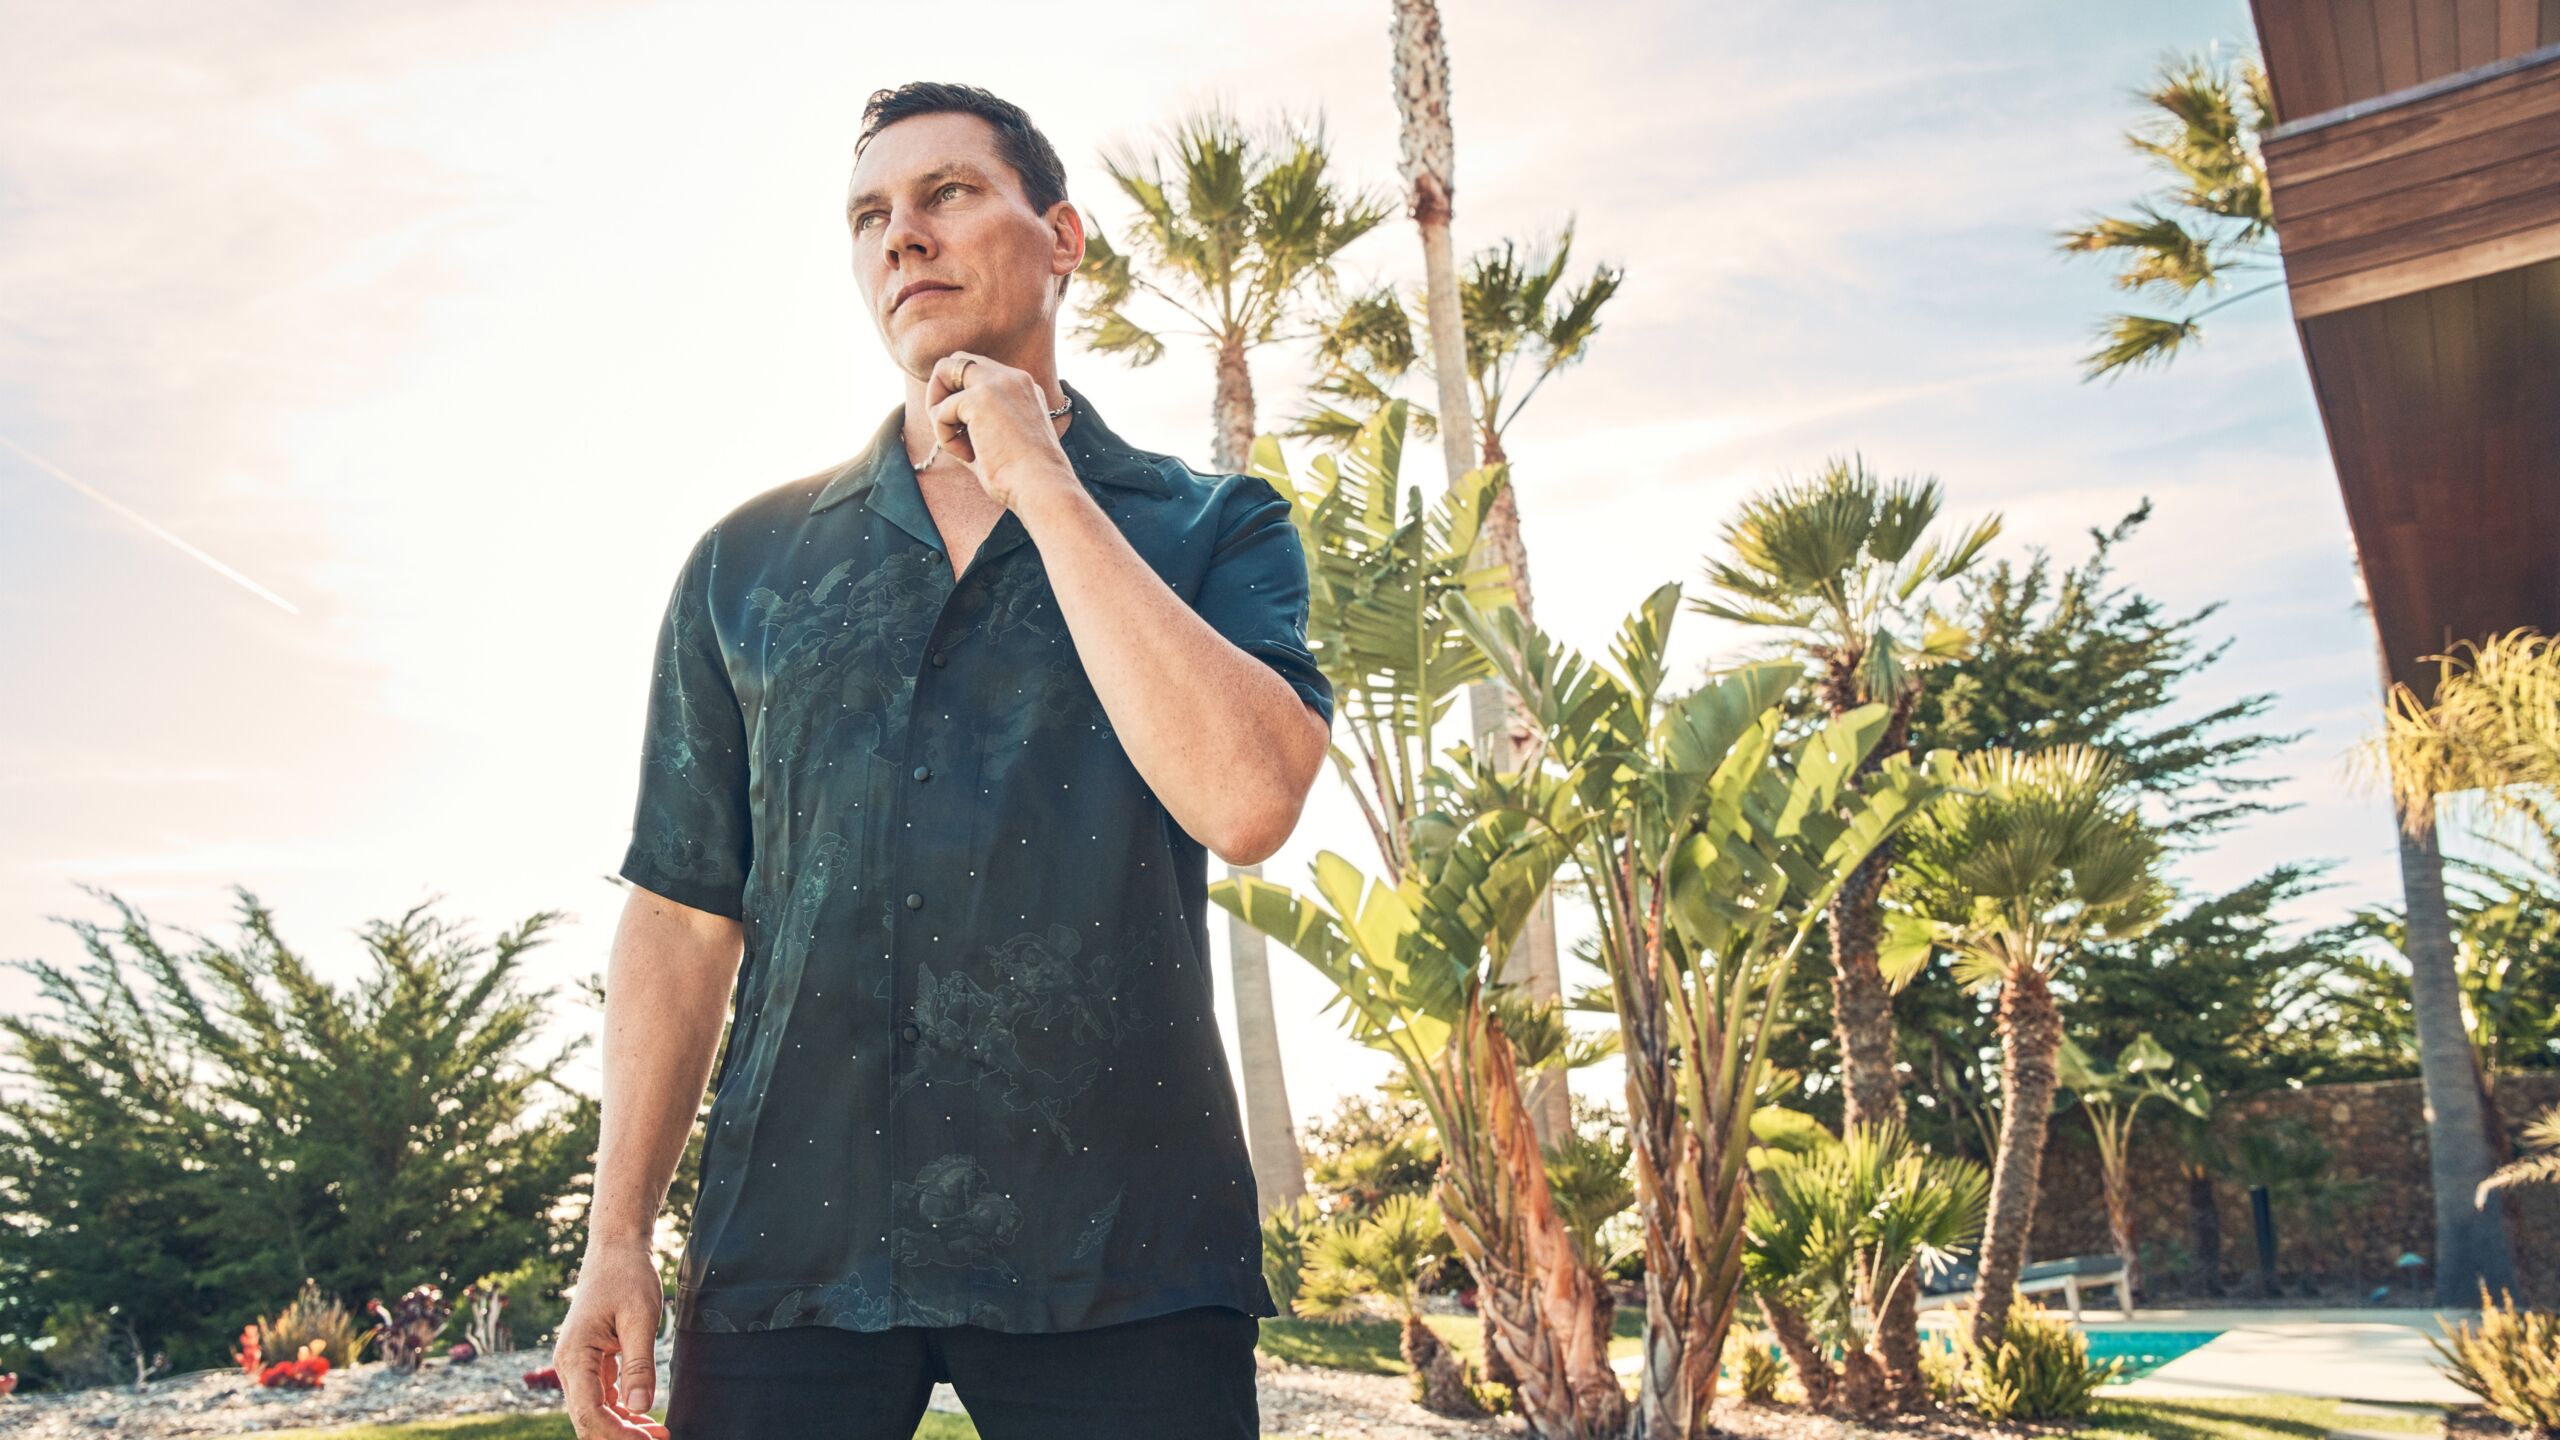 Tiësto And PROPHECY Release Their New Single "My City" On Insomniac Records / Musical Freedom.